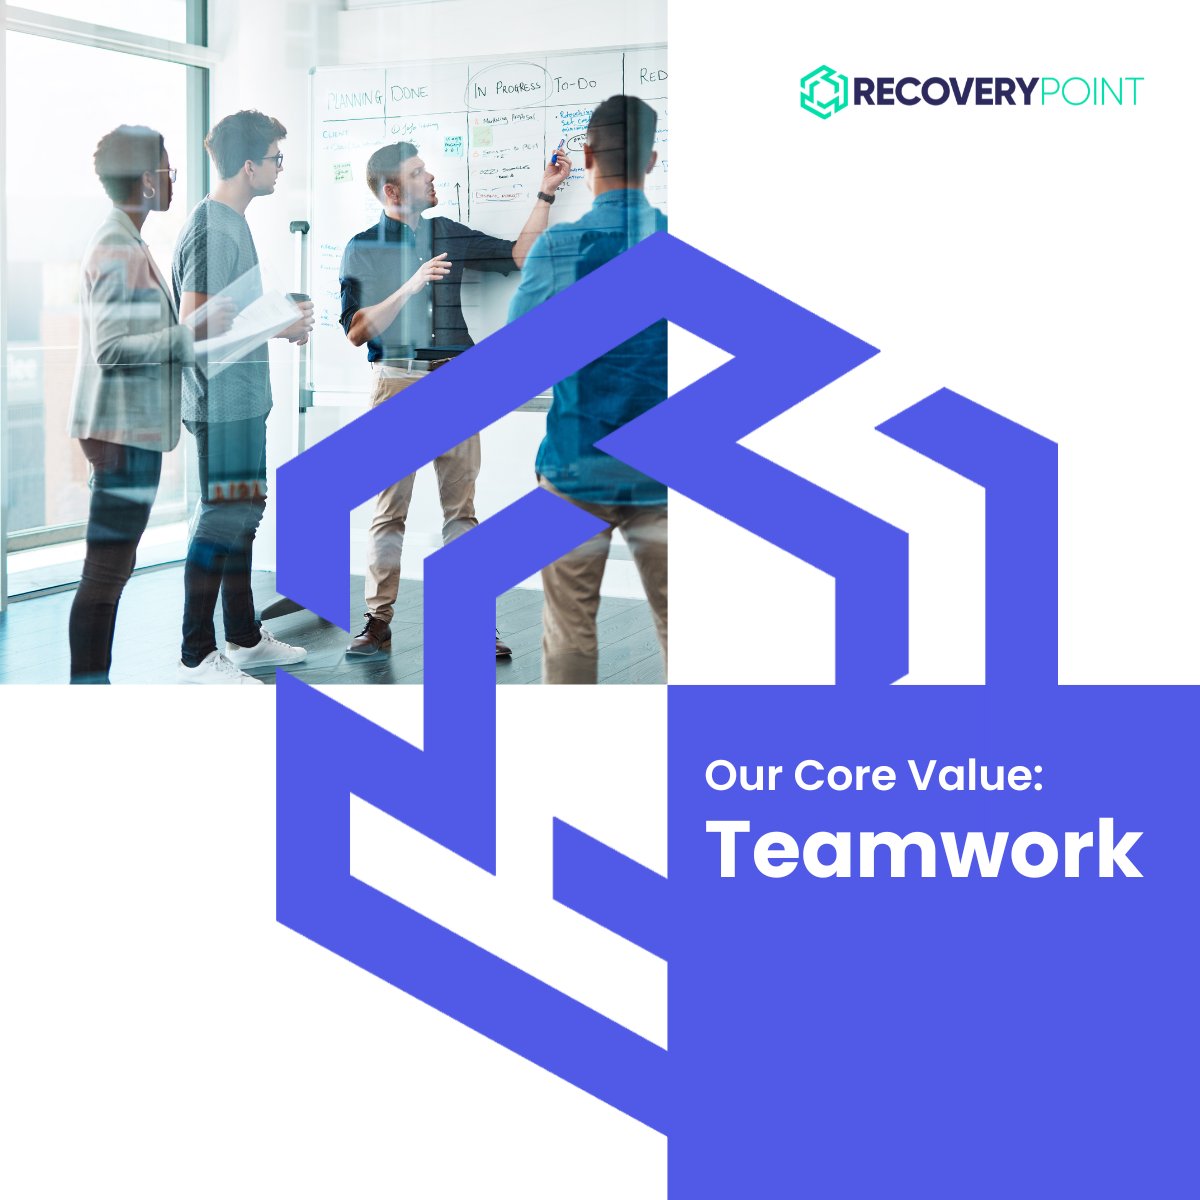 We actively promote a culture where every voice is valued and every individual feels a sense of belonging and purpose, ensuring that our team is as resilient and varied as the solutions we provide.

#DisasterRecovery #BusinessContinuity #CyberResilience #Team